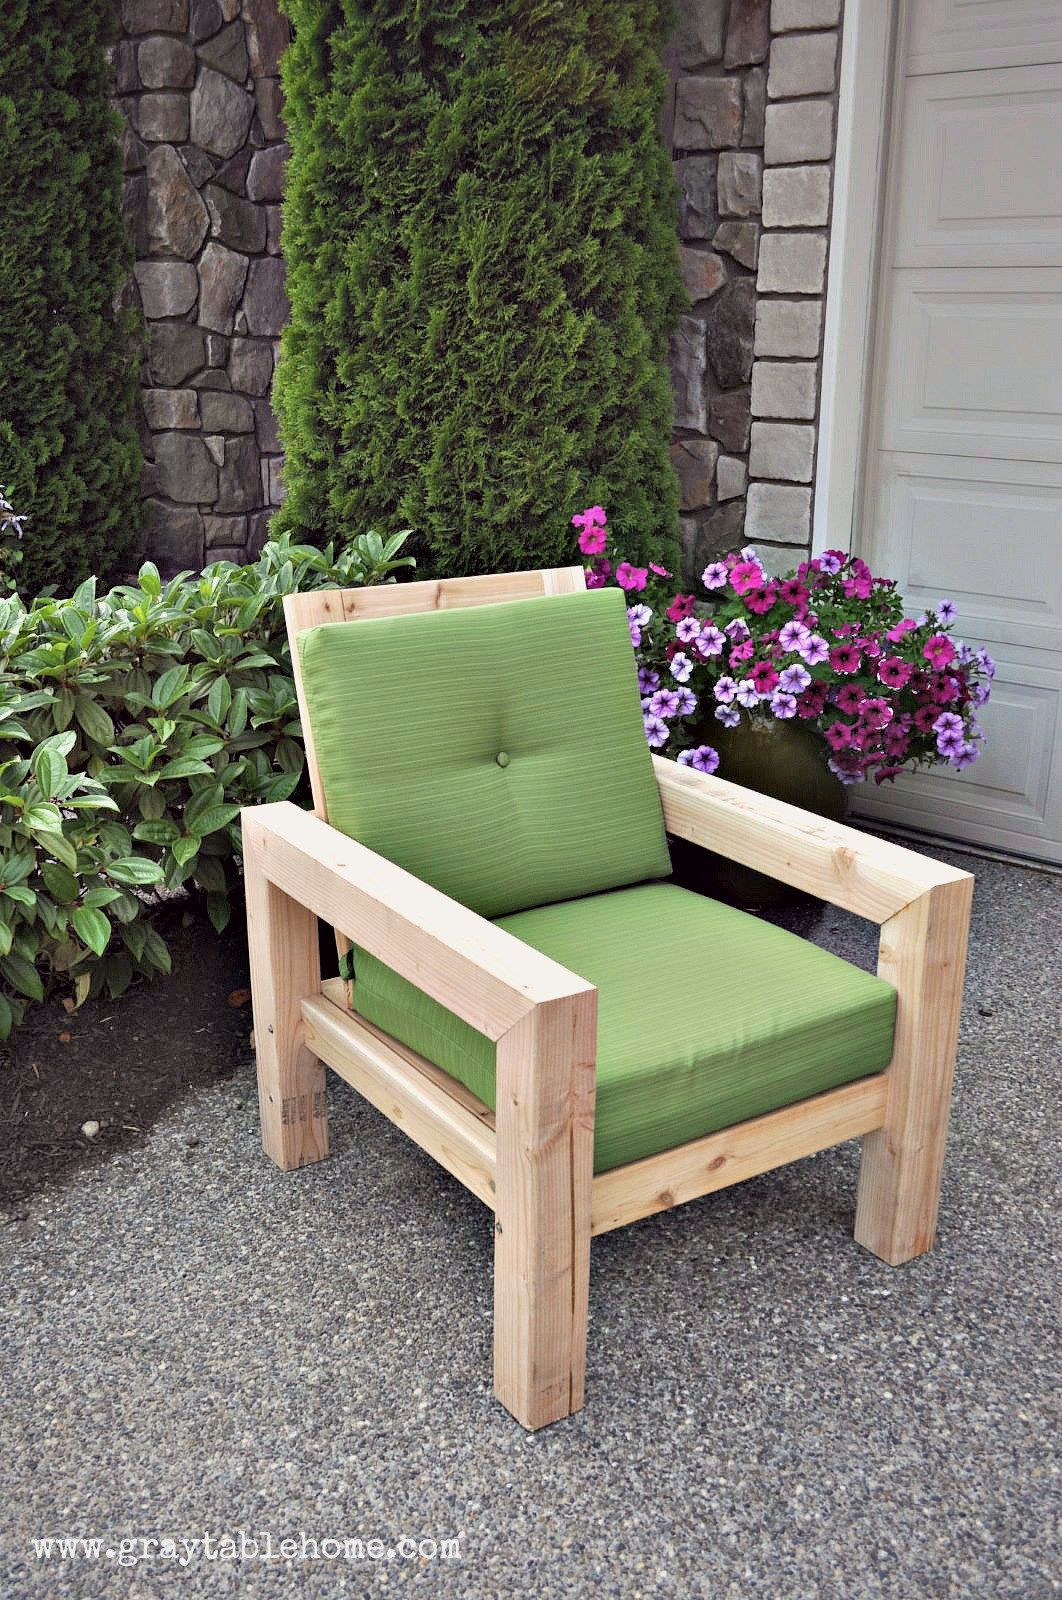 DIY Outdoor Chair Cushions
 DIY Modern Rustic Outdoor Chair plans using outdoor